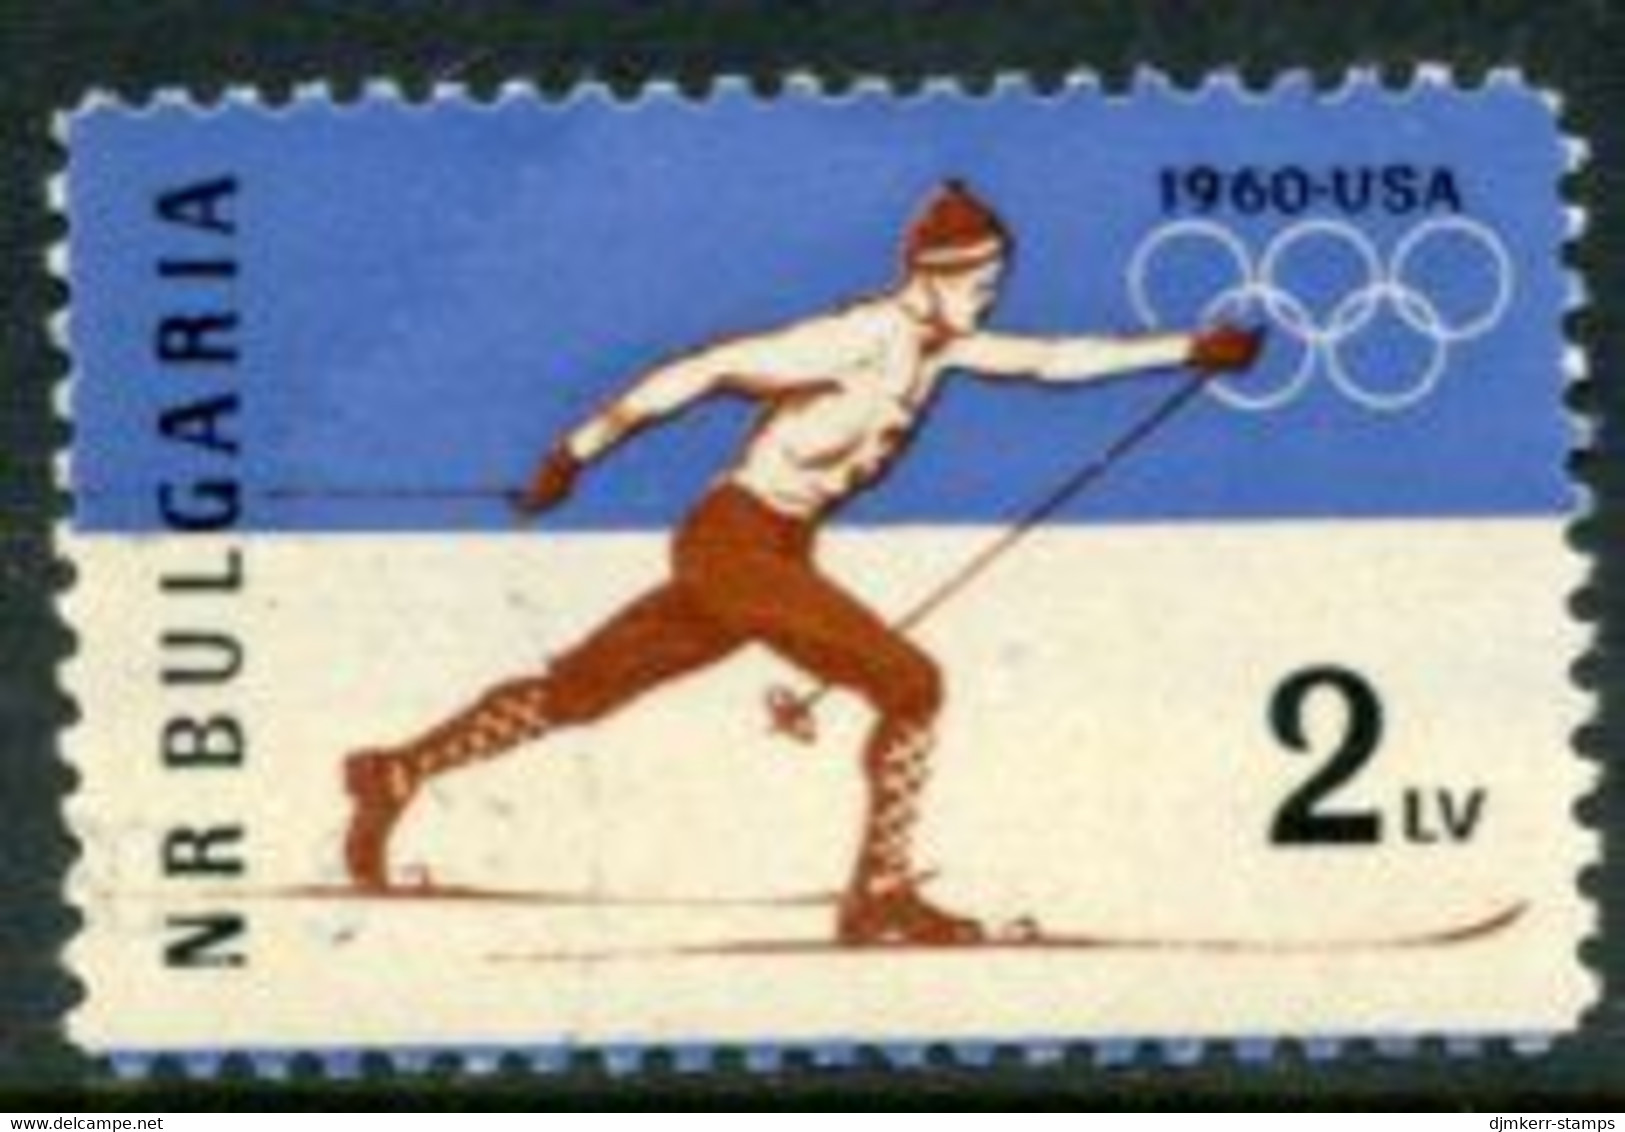 BULGARIA 1960 Winter Olympic Games Perforated MNH / **.  Michel 1153A - Nuevos